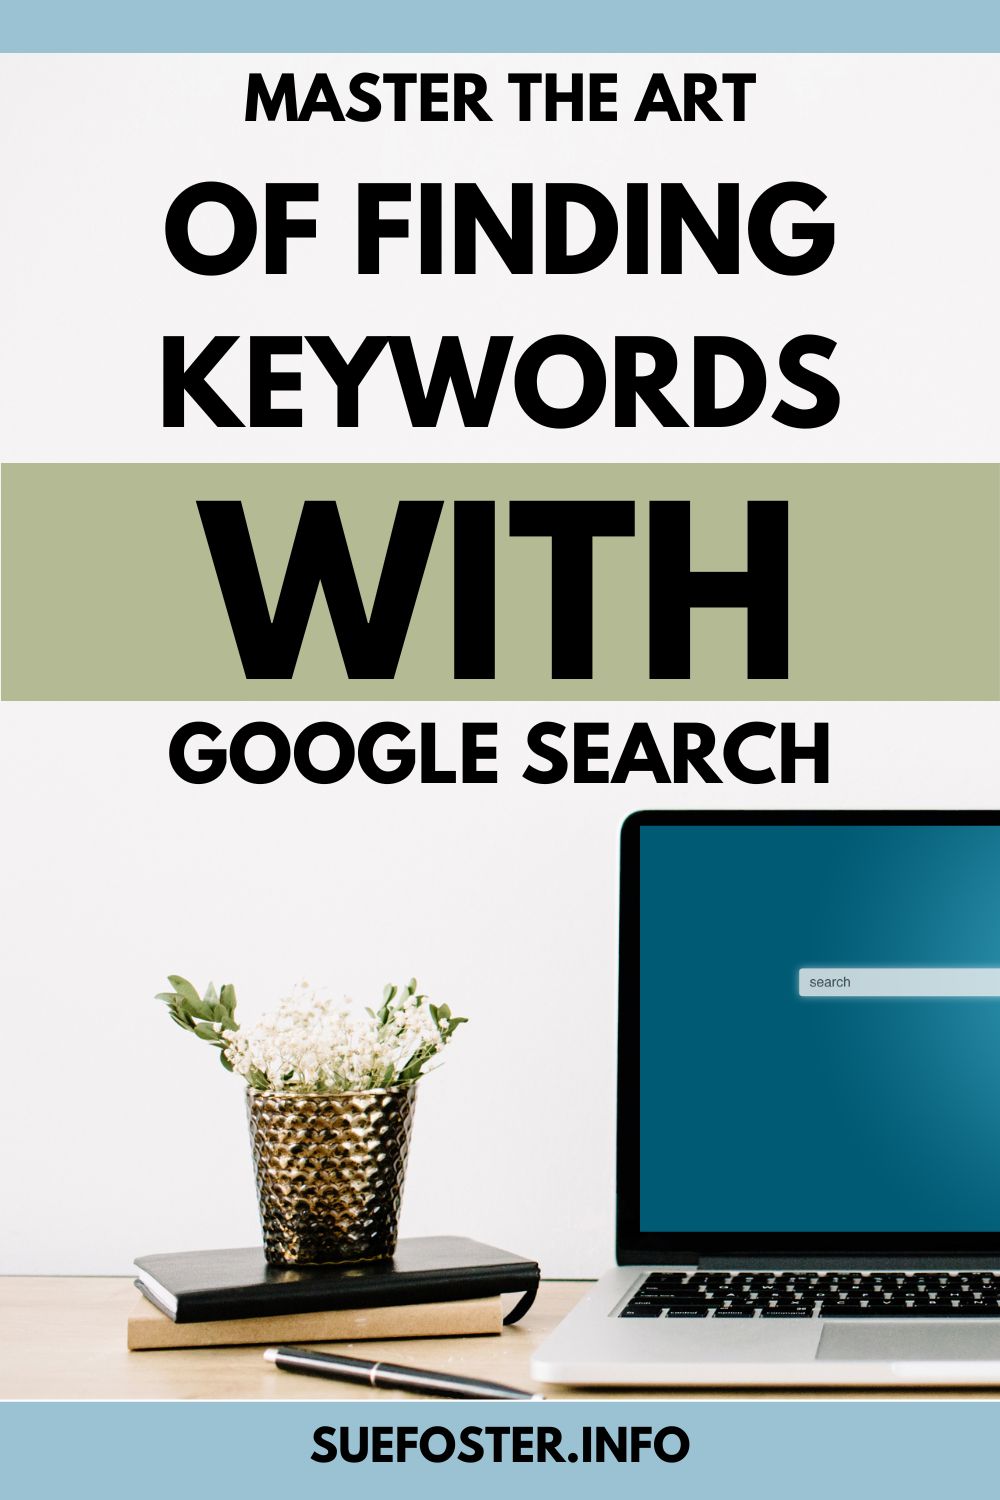 Learn the art of finding keywords with Google Search. Enhance your online visibility and attract the right audience with effective keyword research.